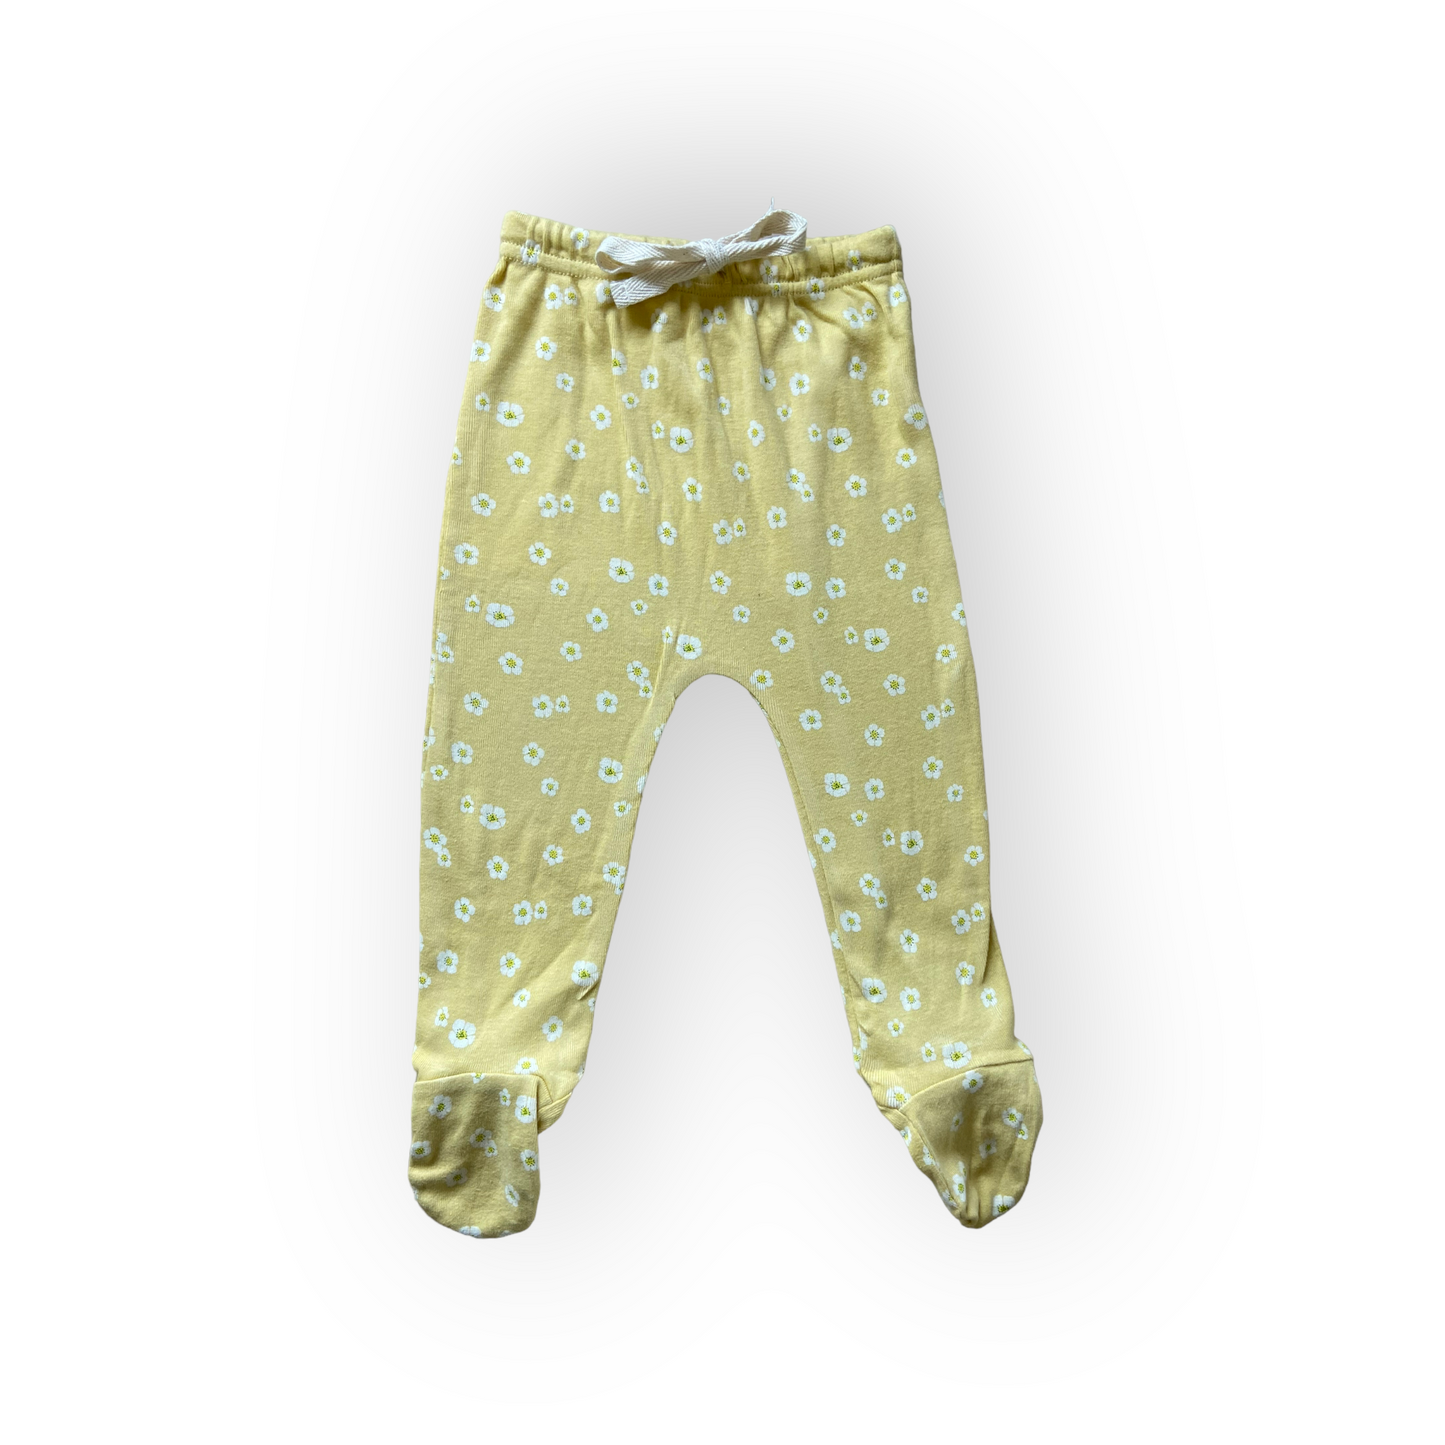 Nature baby footed pants | size 3-6 months | GUC